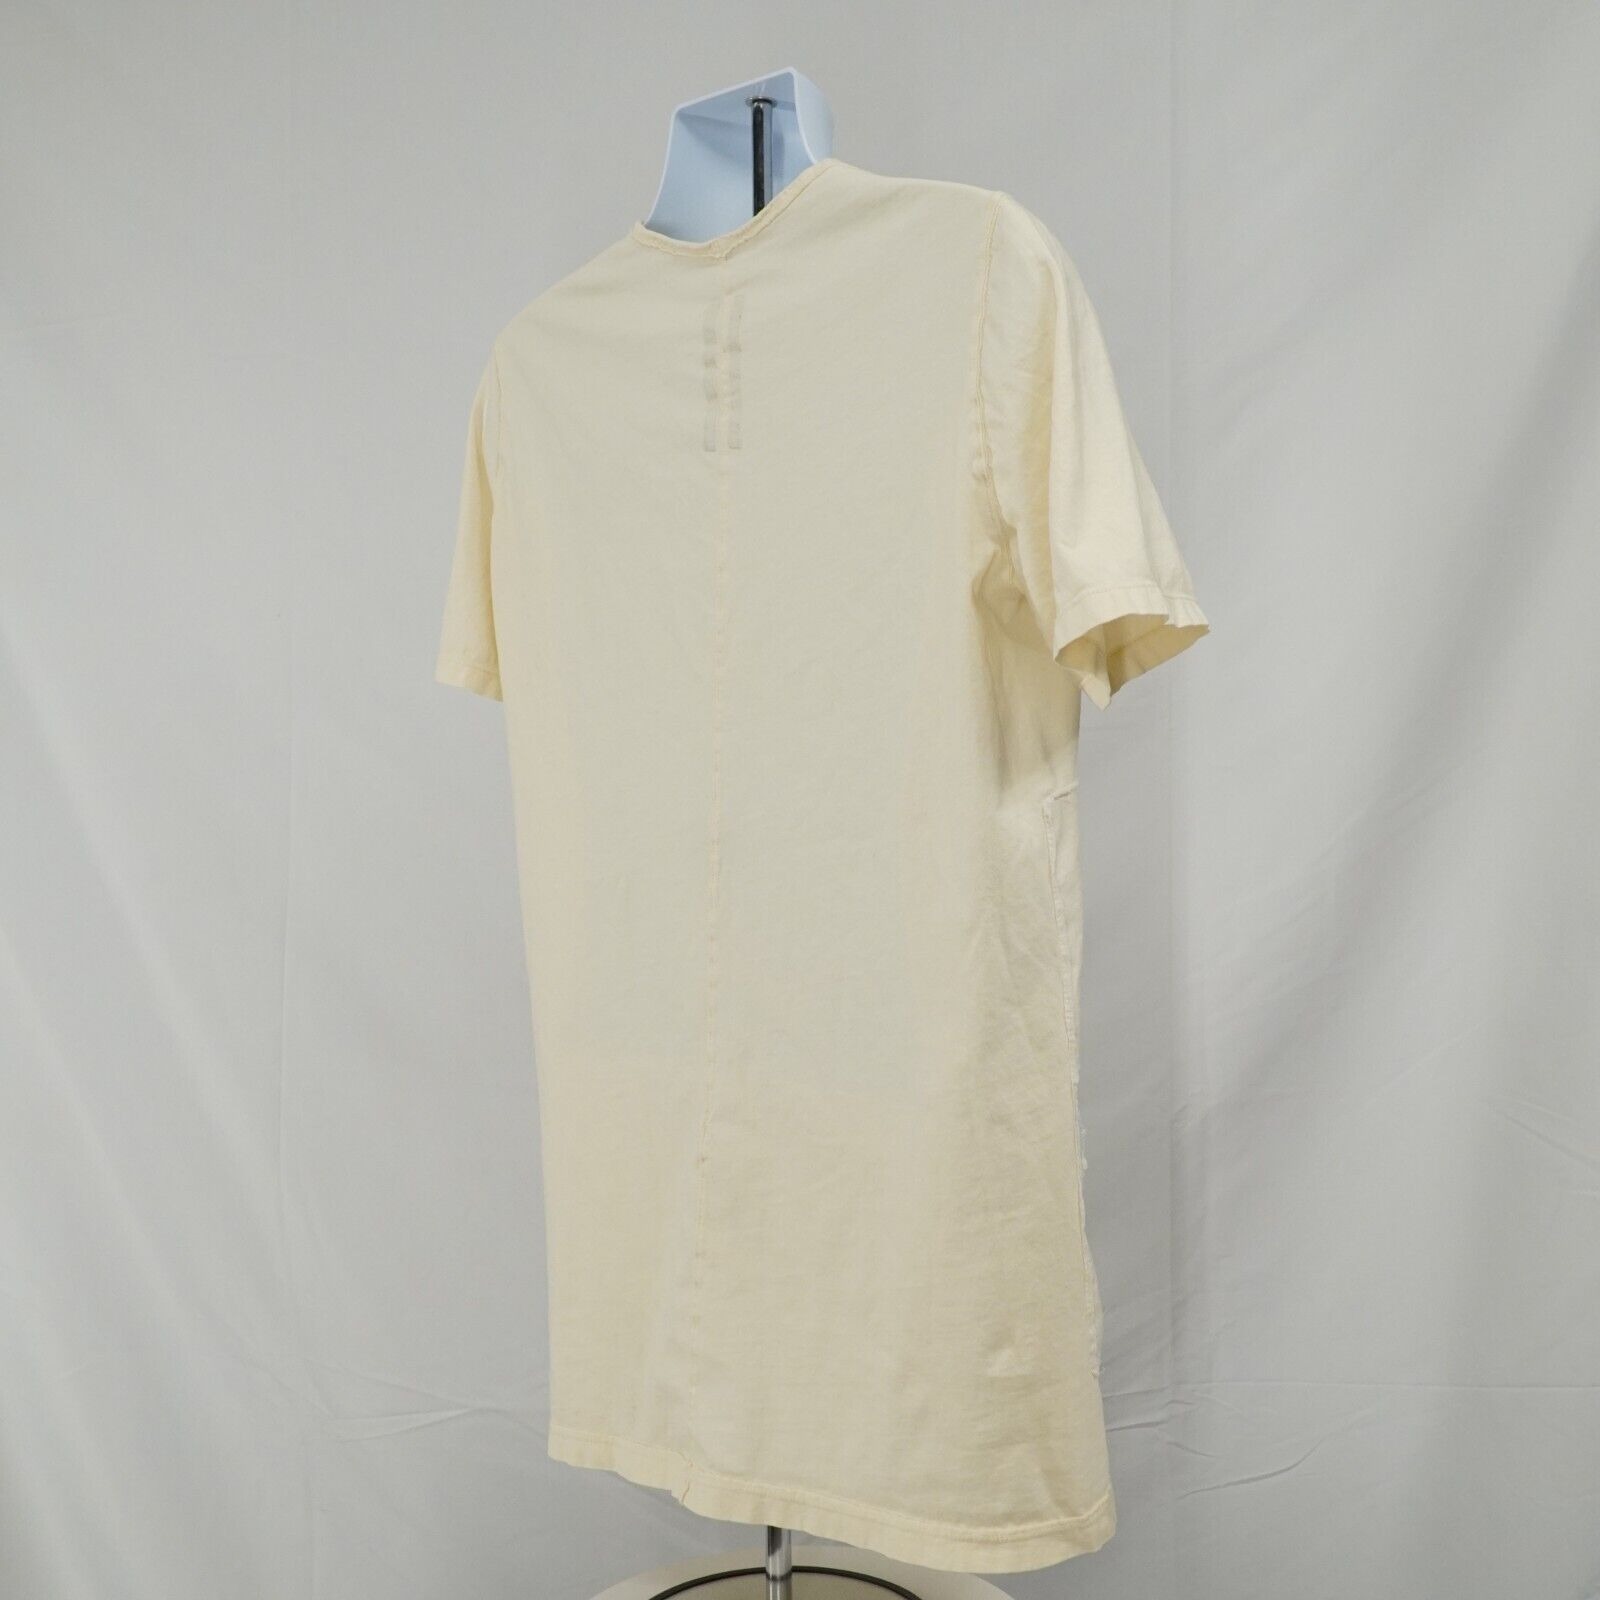 DRKSDHW Patched Level Tee Milk White Cotton - Lar - 17